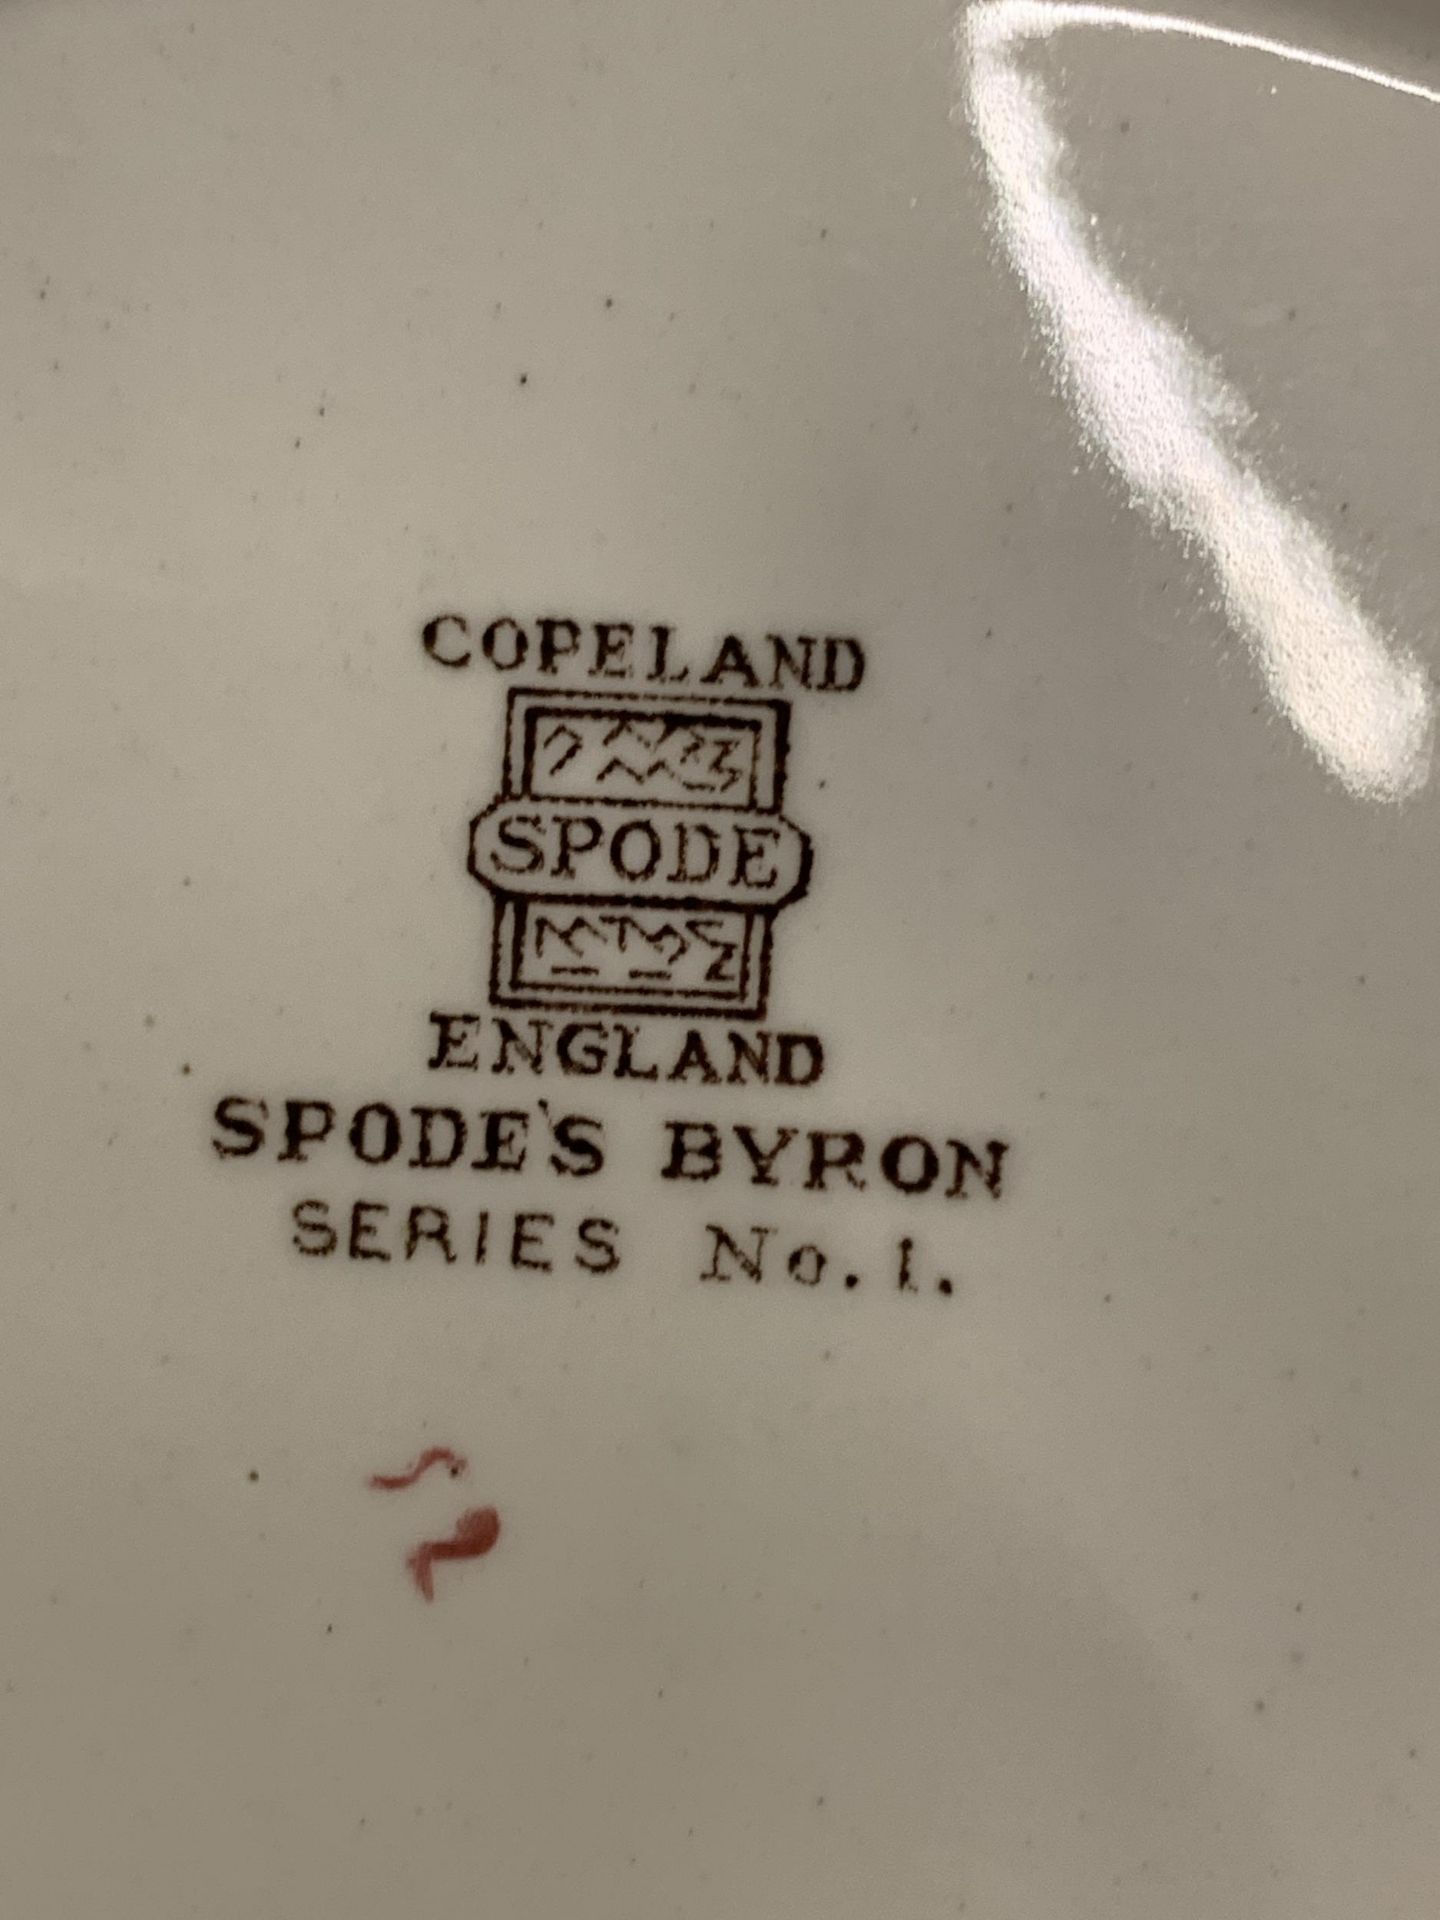 A COLLECTION OF BLUE AND WHITE COPELAND SPODE ITALIAN PATTERN TABLEWARES AND FURTHER COPELAND - Image 3 of 4